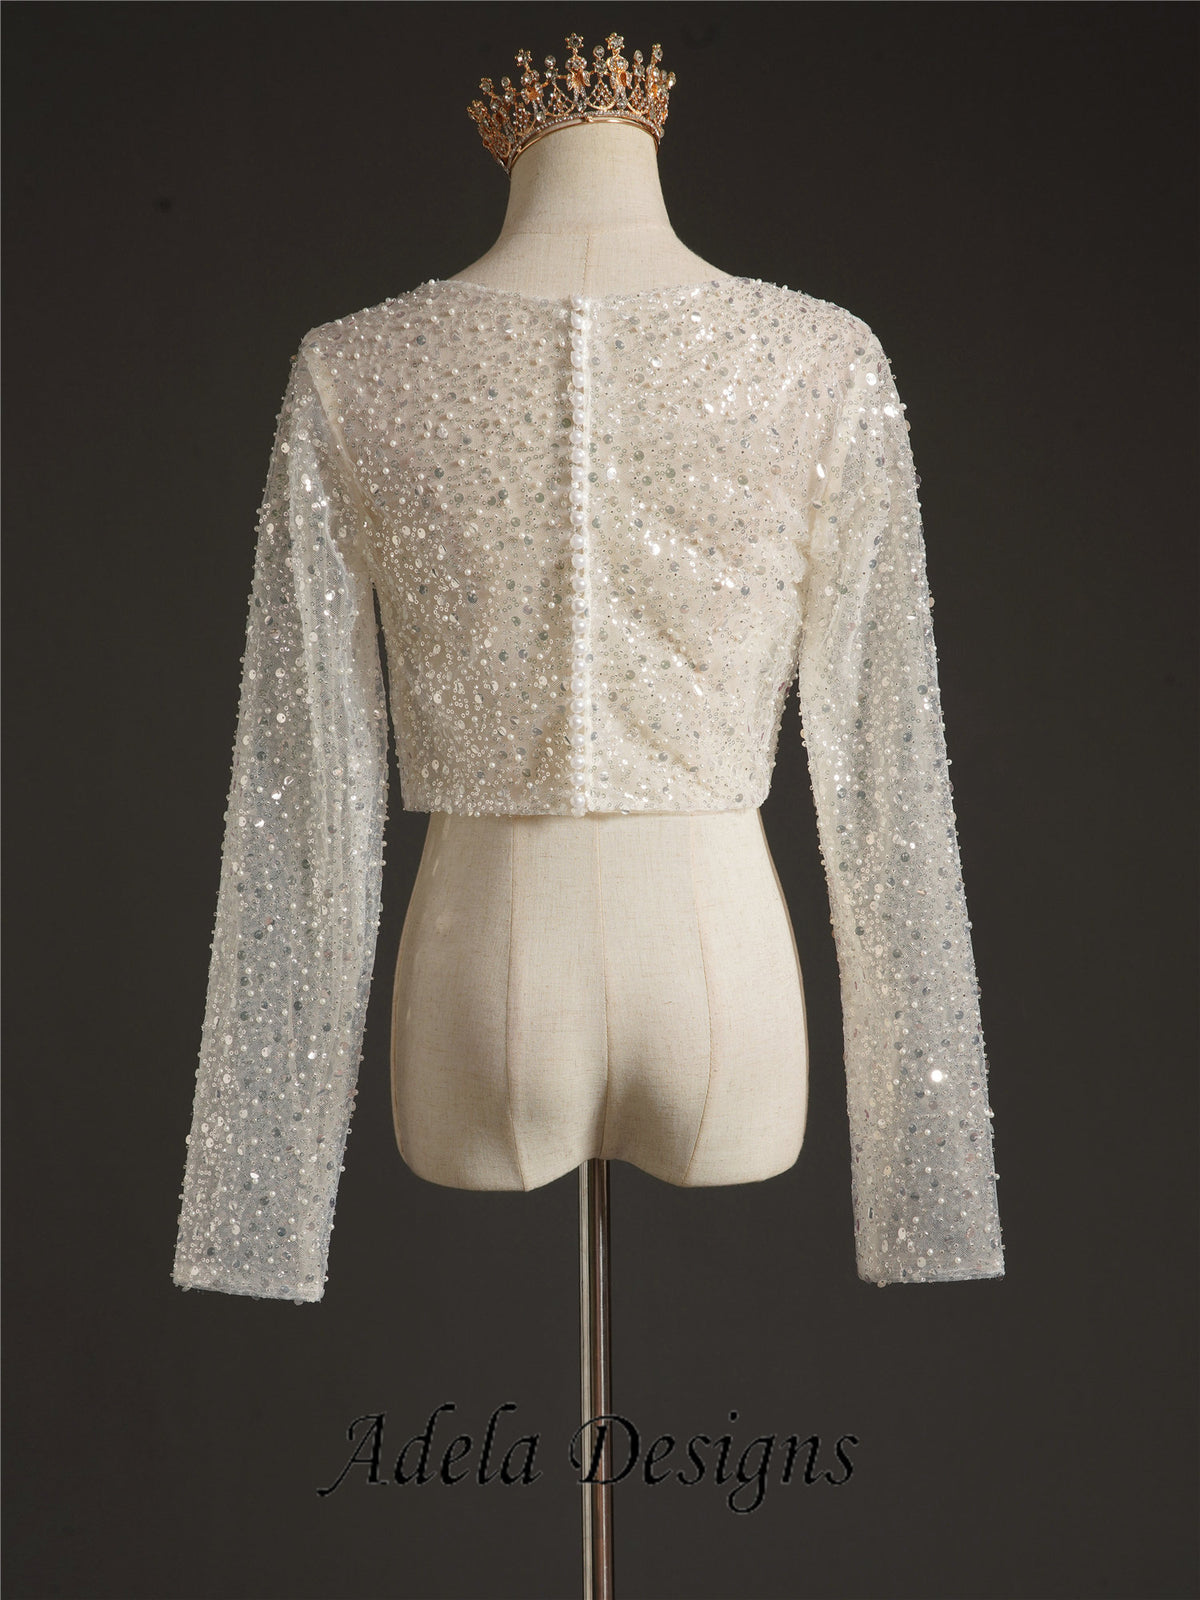 Sparkley Wedding or Bridal Top Bolero - Soft Illusion Ivory Tulle with Faux Pearl & Sequin Detail Long Sleeve Sheer